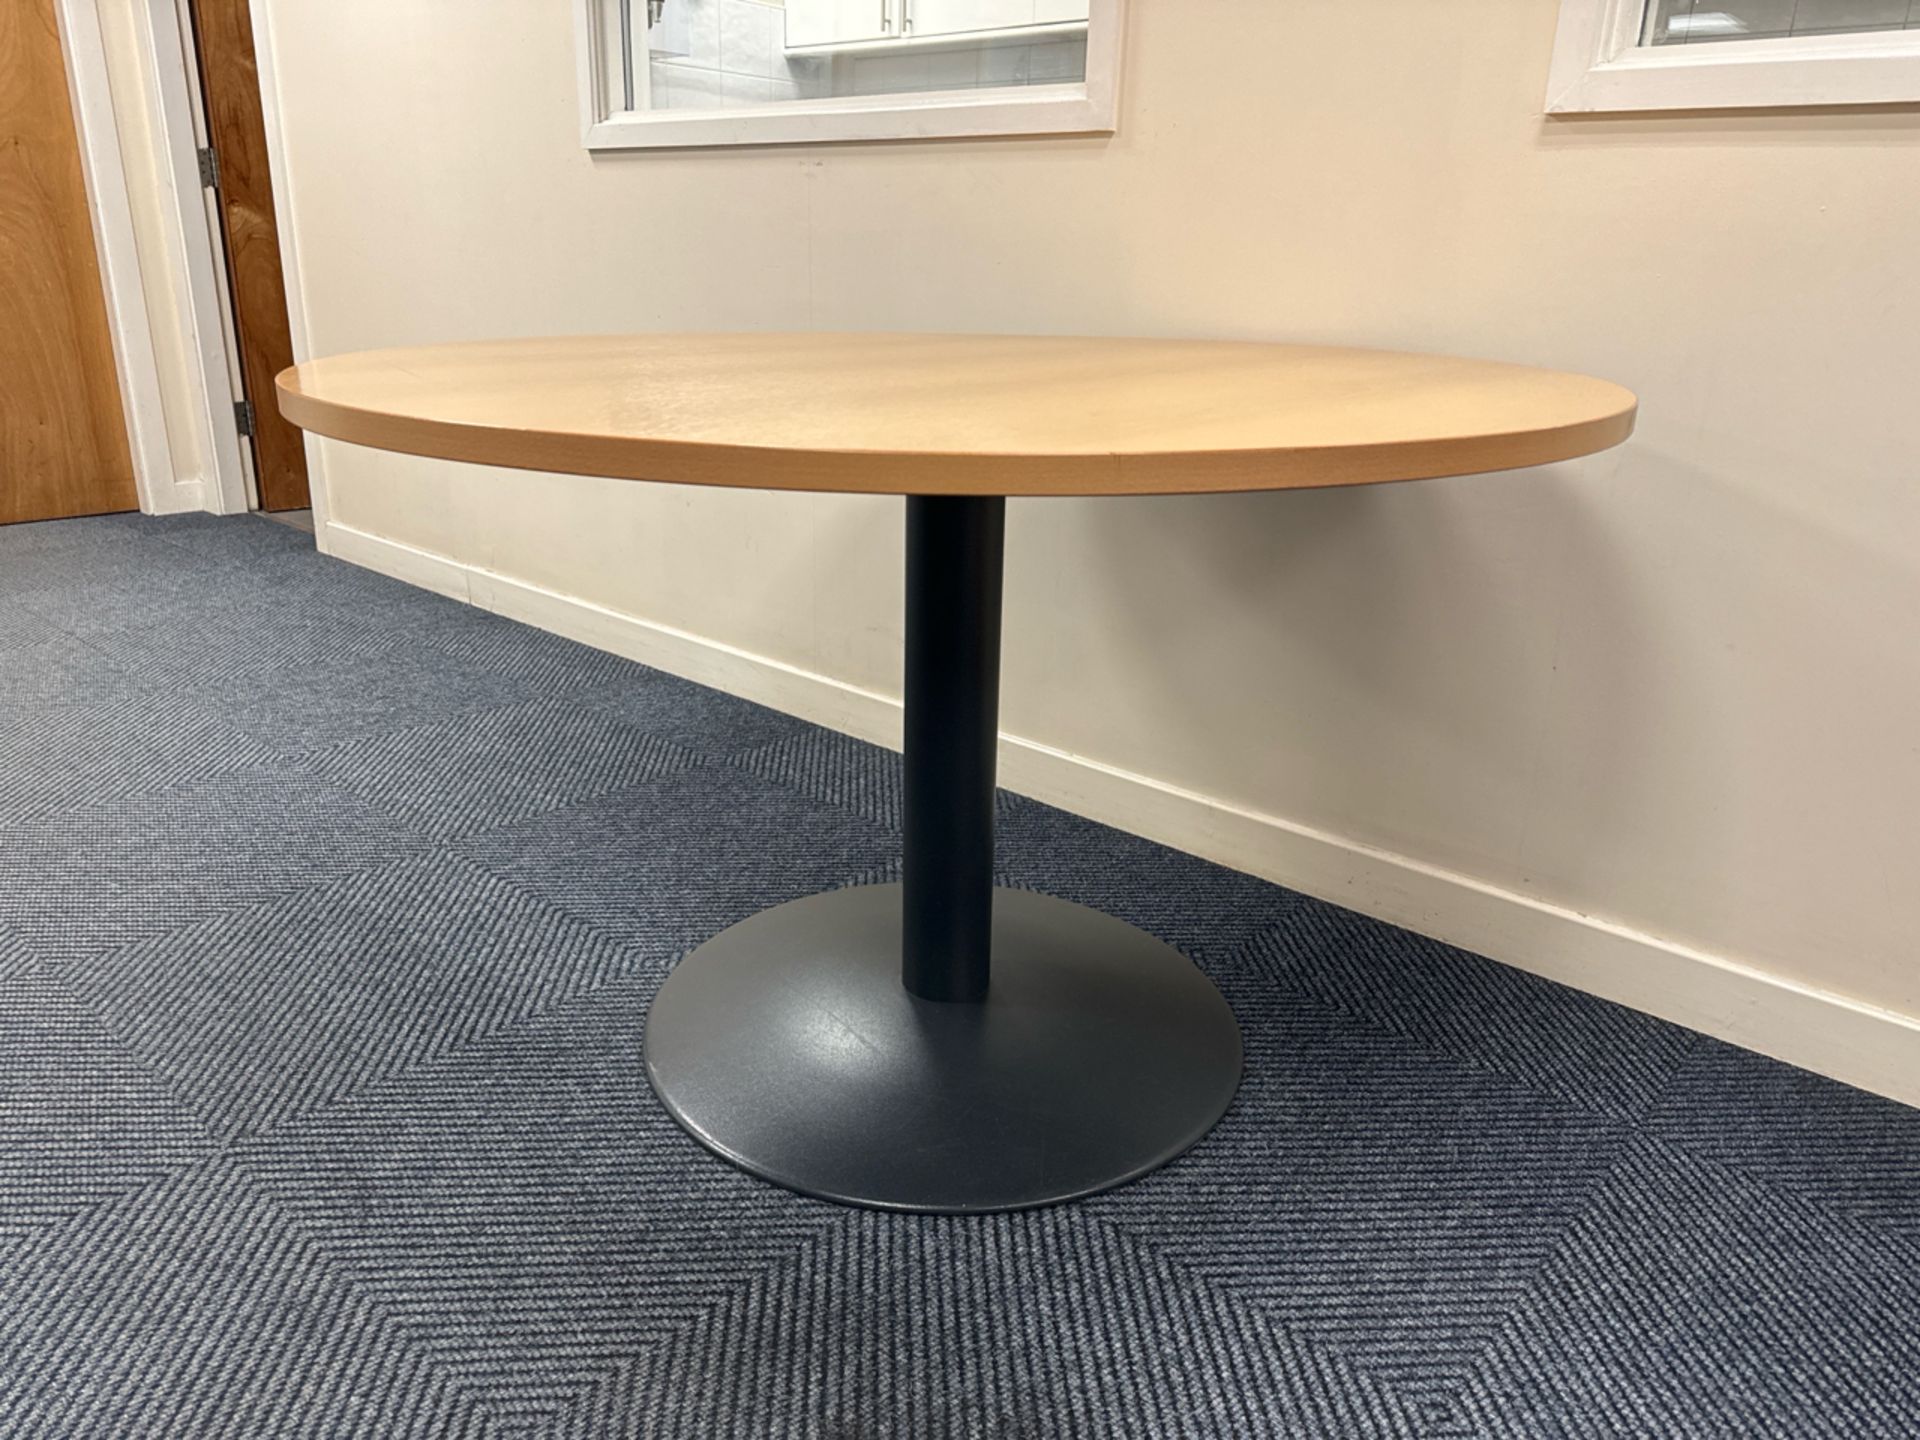 ref 298 - Circular Pine Effect Table - Image 3 of 3